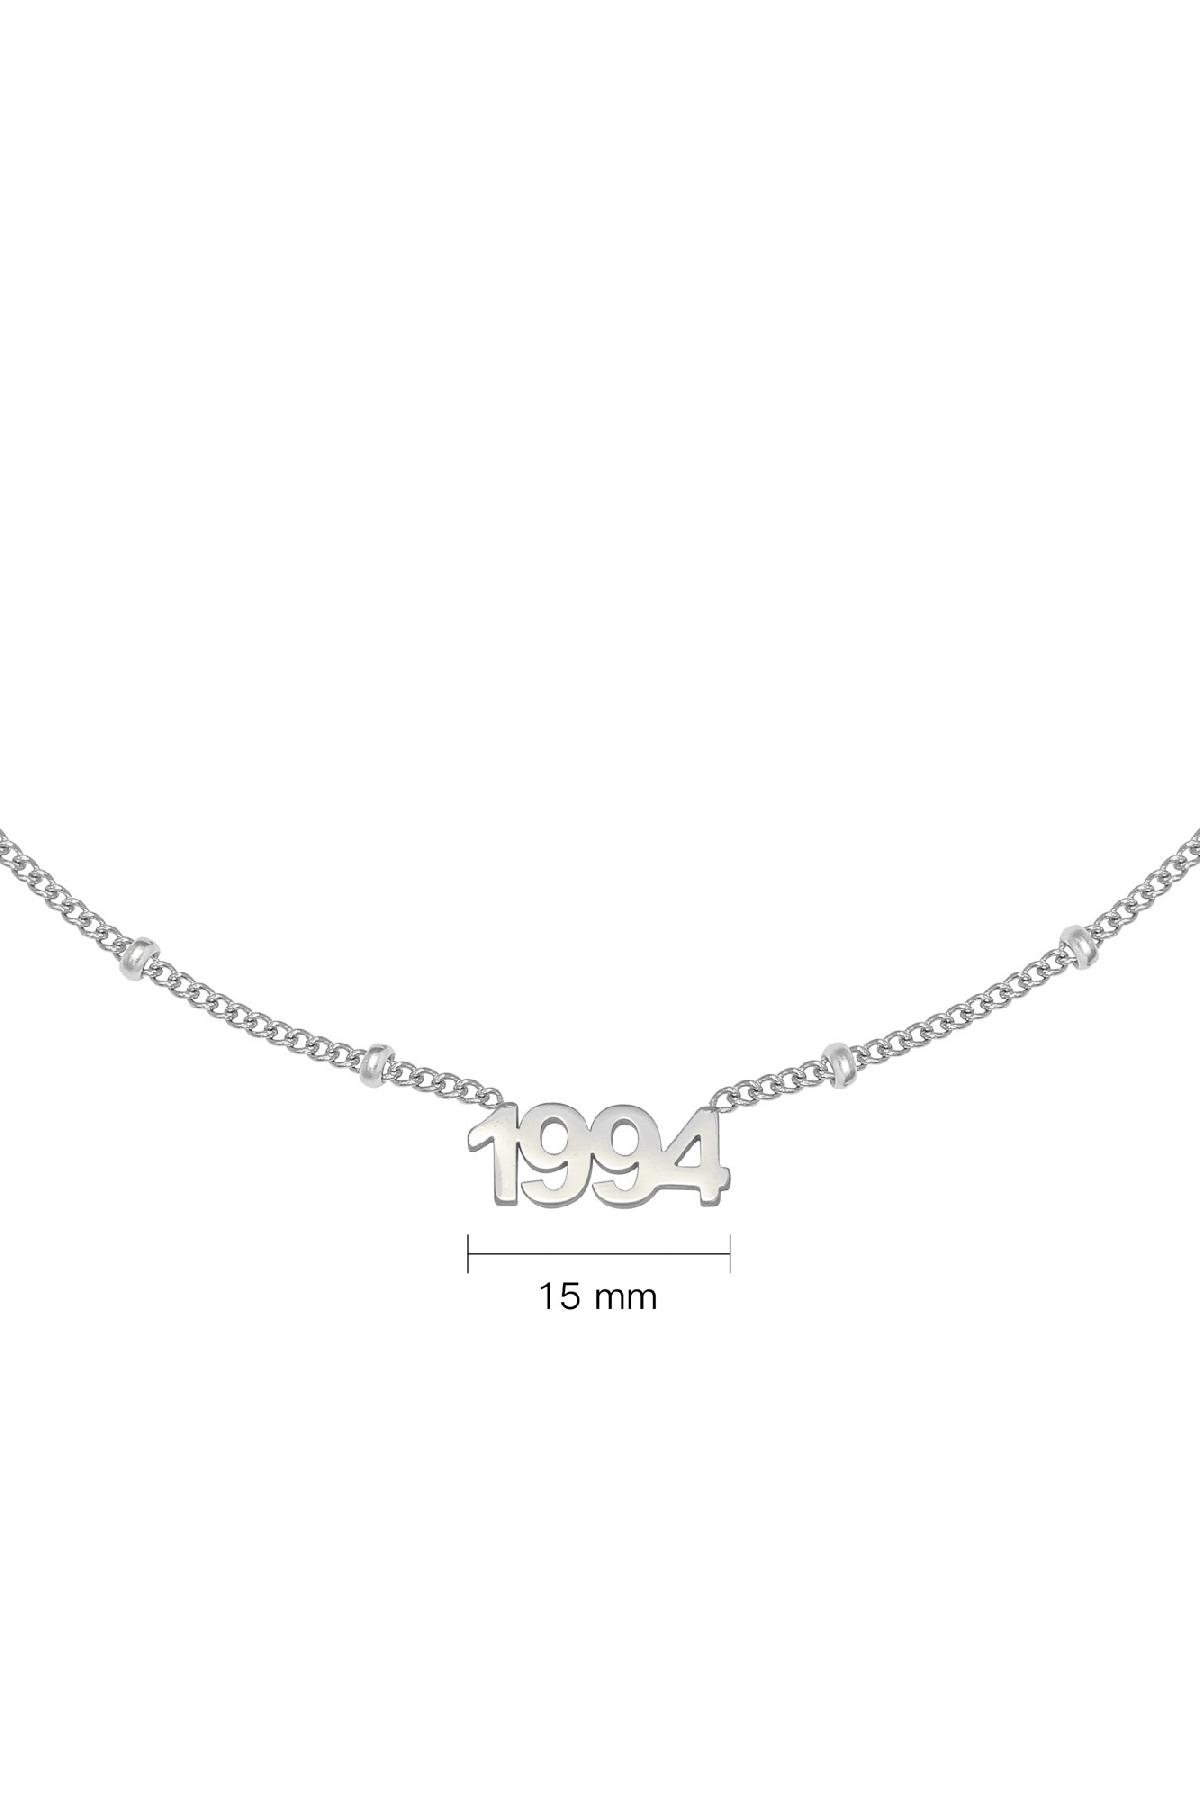 Necklace Year 1994 Silver Stainless Steel Picture2